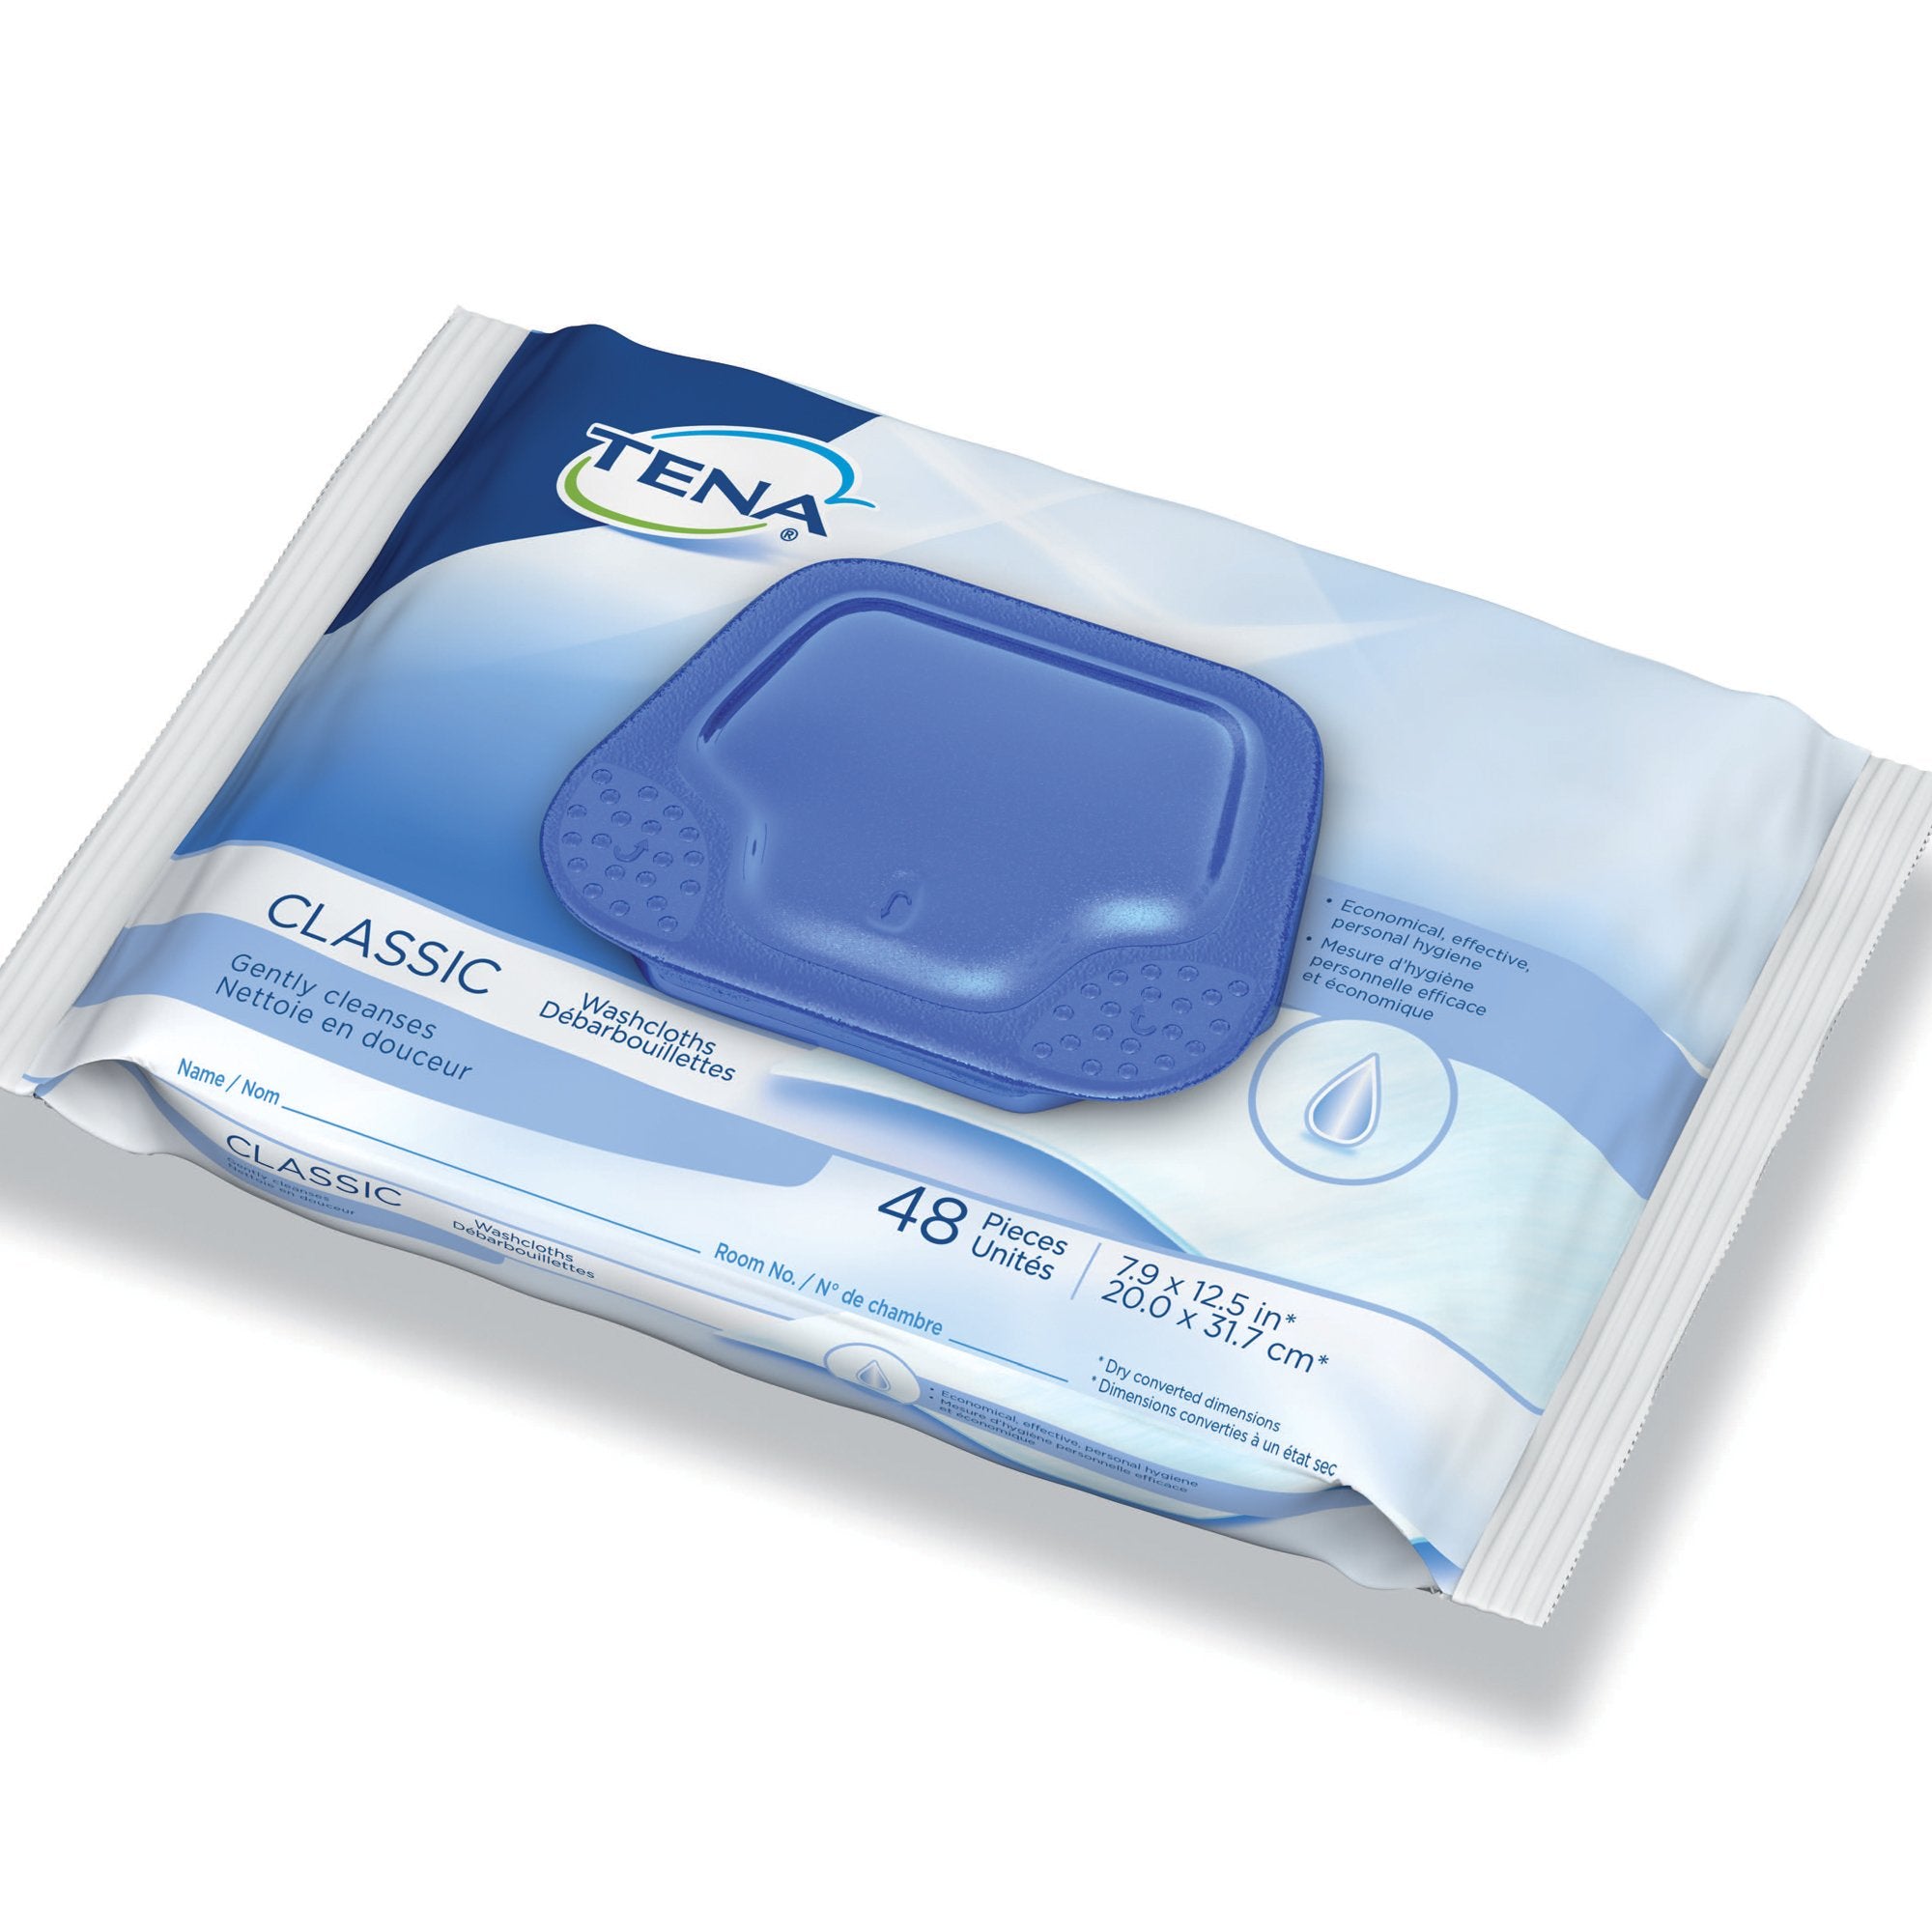 Personal Cleansing Wipe TENA ProSkin™ Classic Soft Pack Scented 48 Count